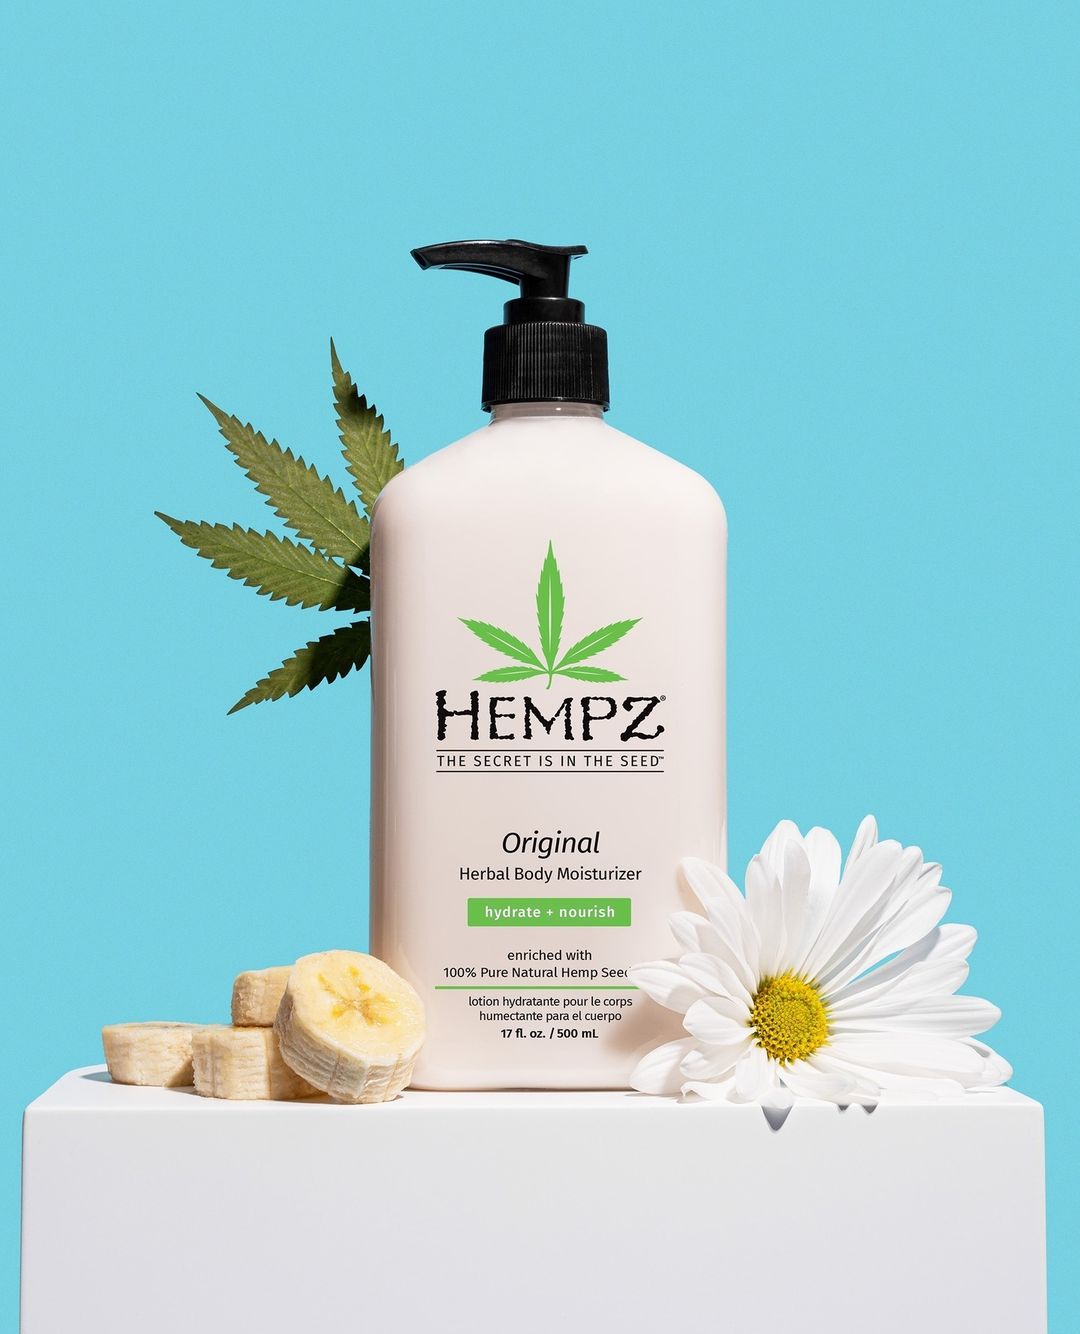 Hempz lotion on stand with flowers and bananas